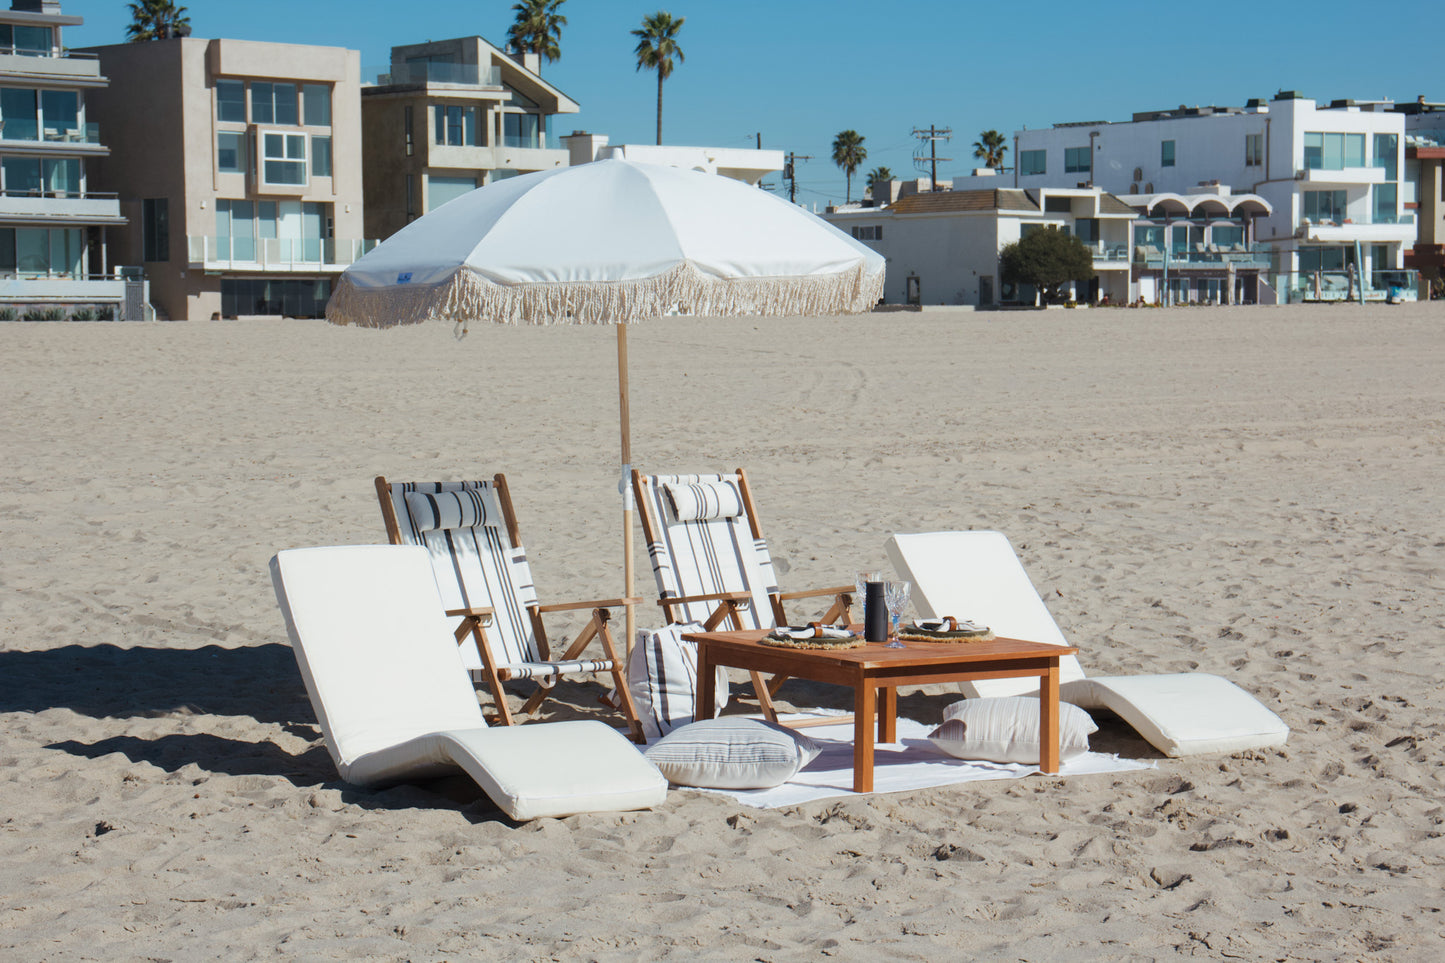 Santa Monica Picnic Company Rental Service for Los Angeles Beach Events and Experiences